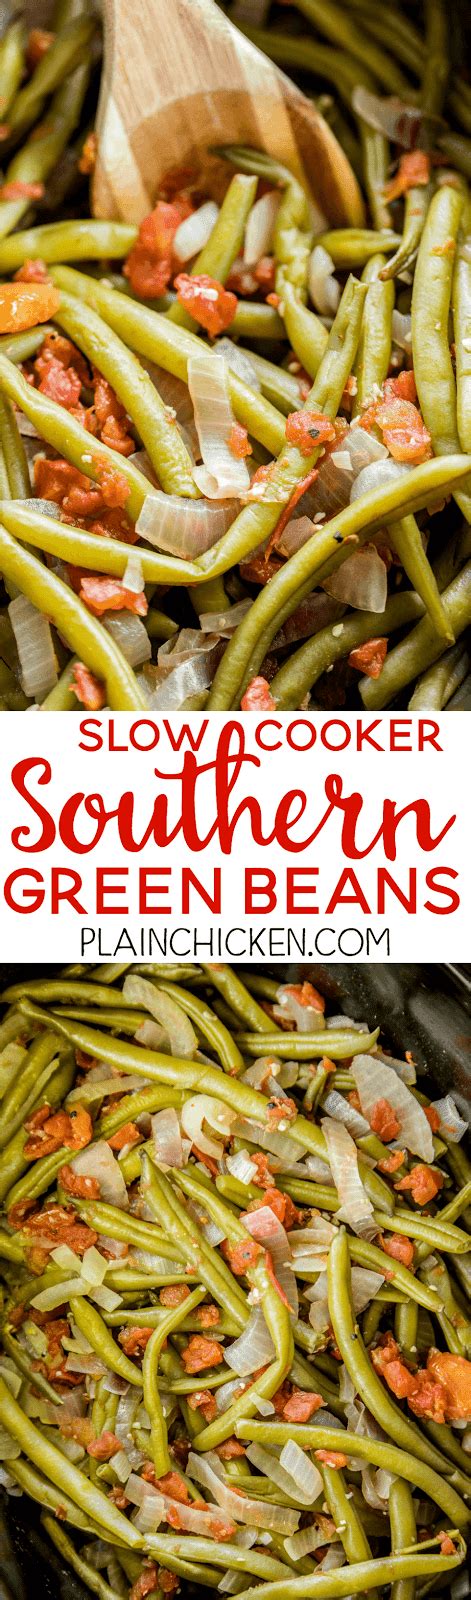 slow-cooker-southern-green-beans-with-tomatoes image